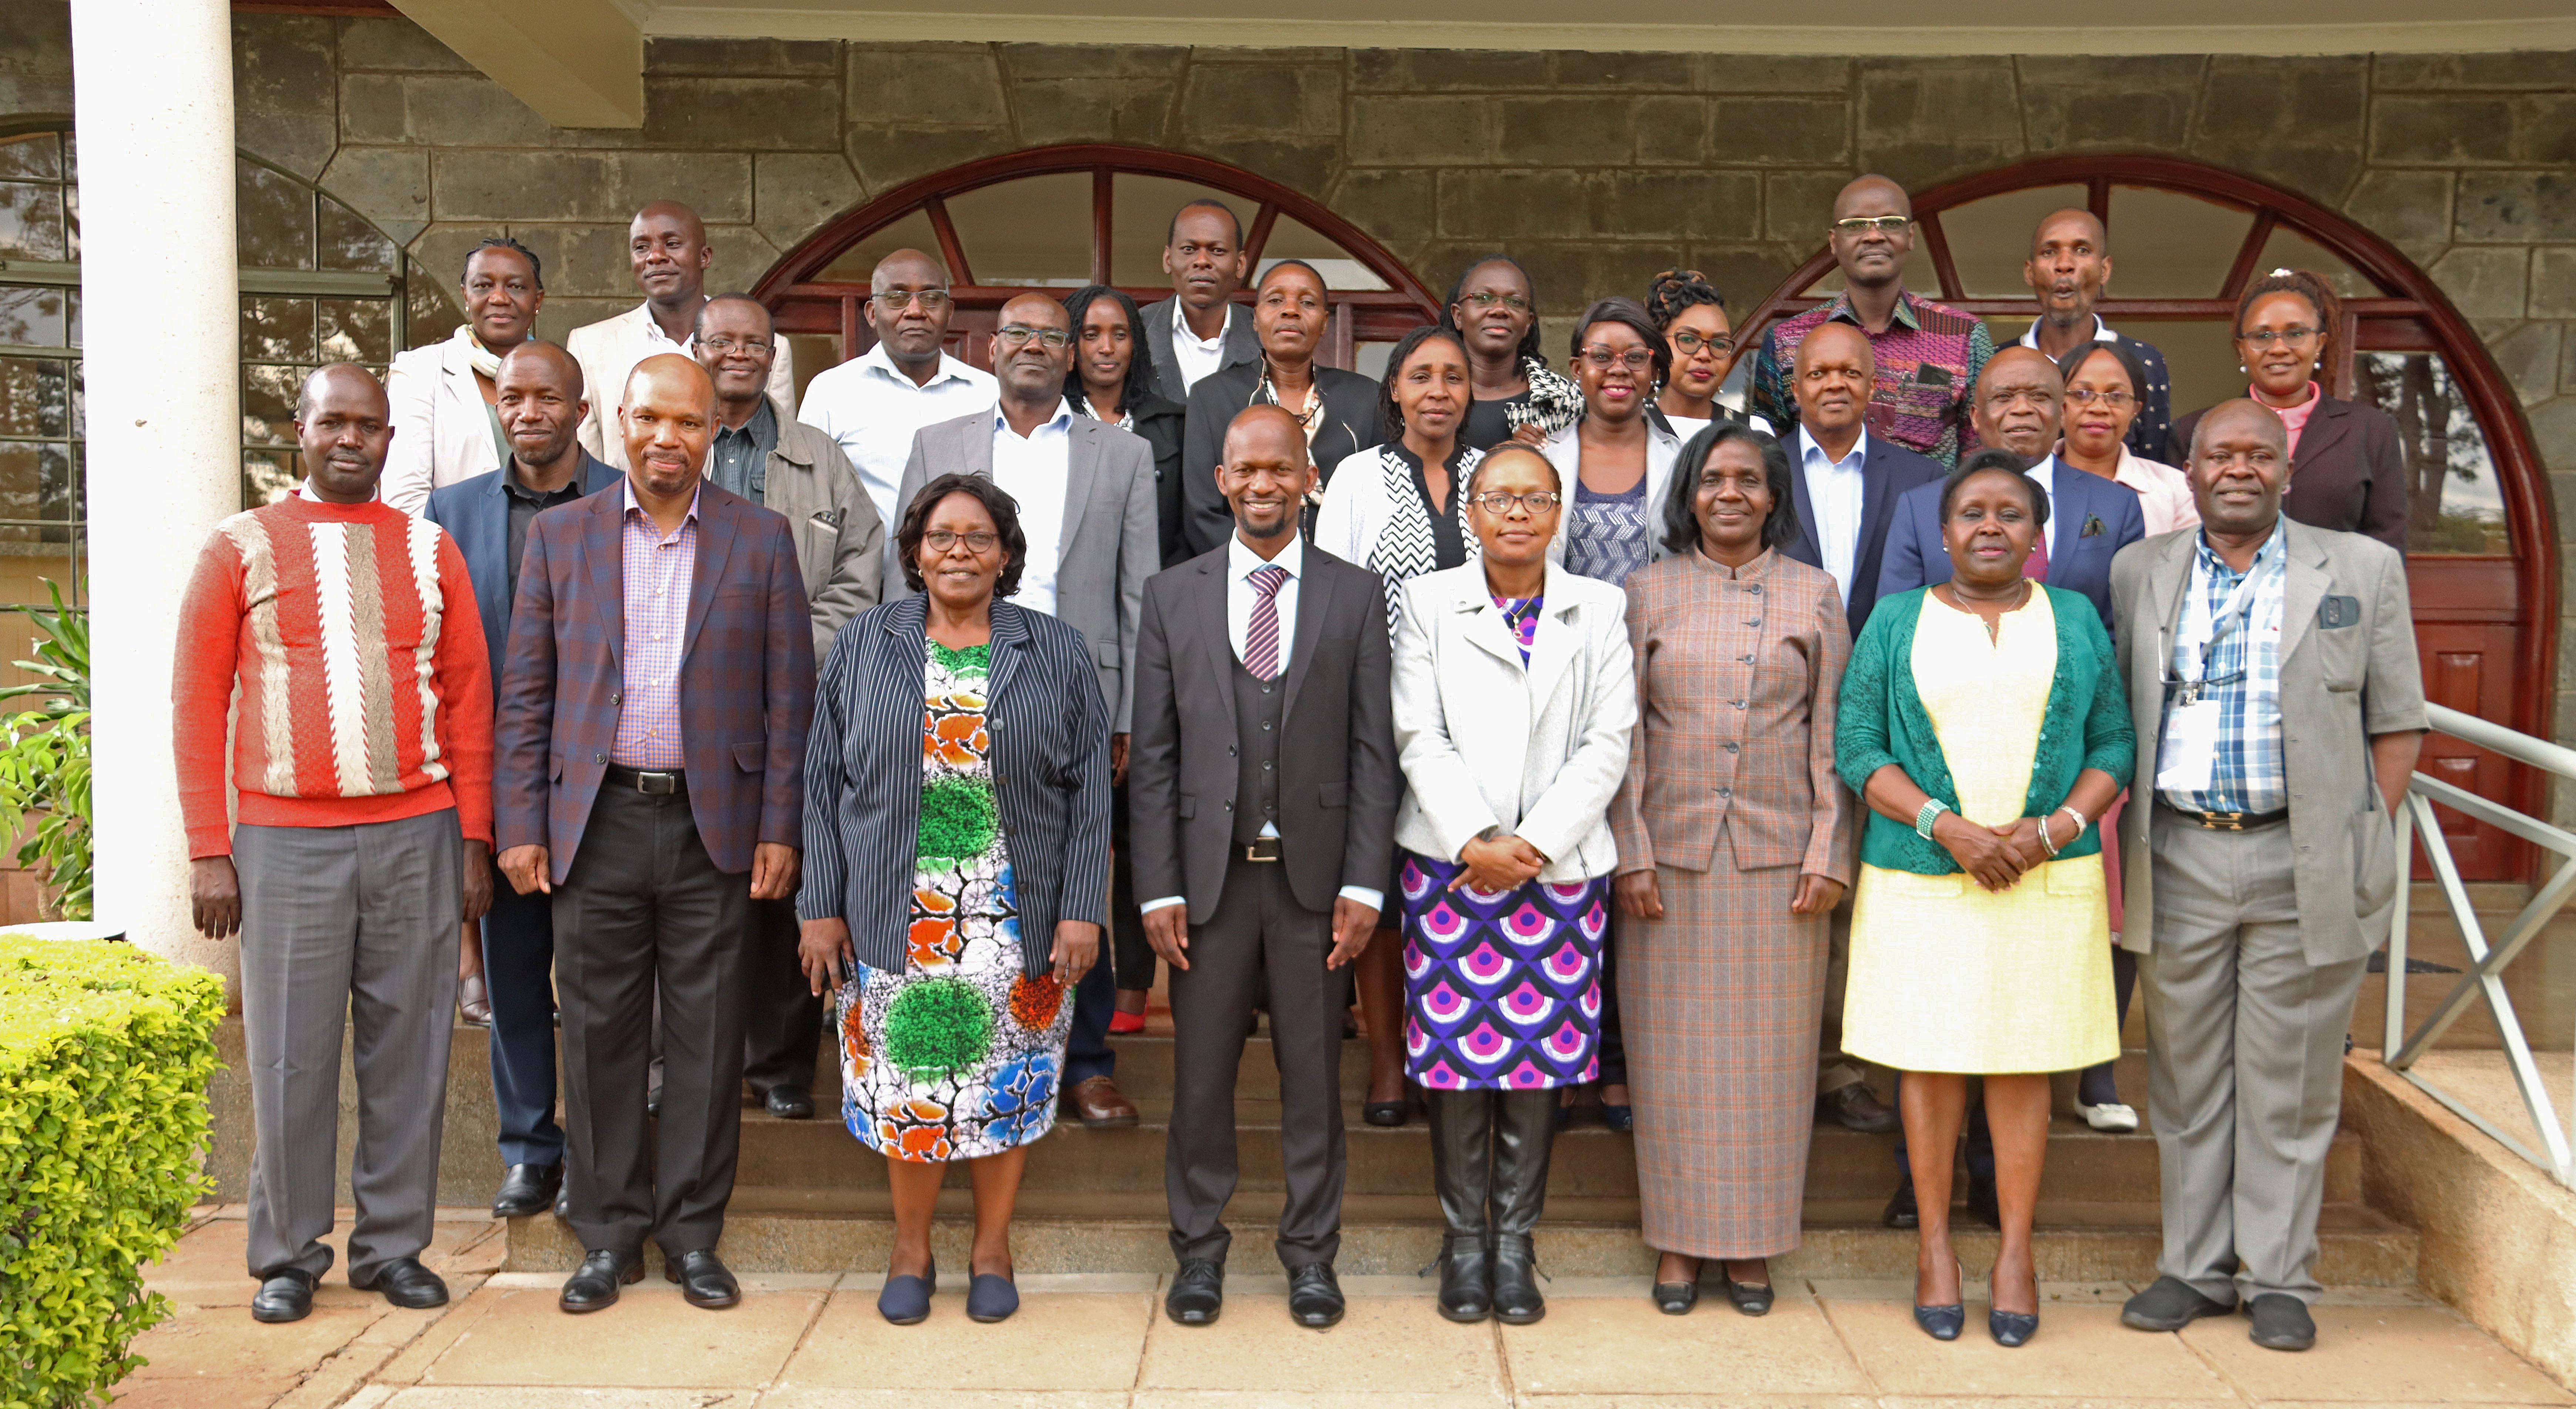 Chairman and other members attend Faculty management meeting at KCB Karen leadership center.